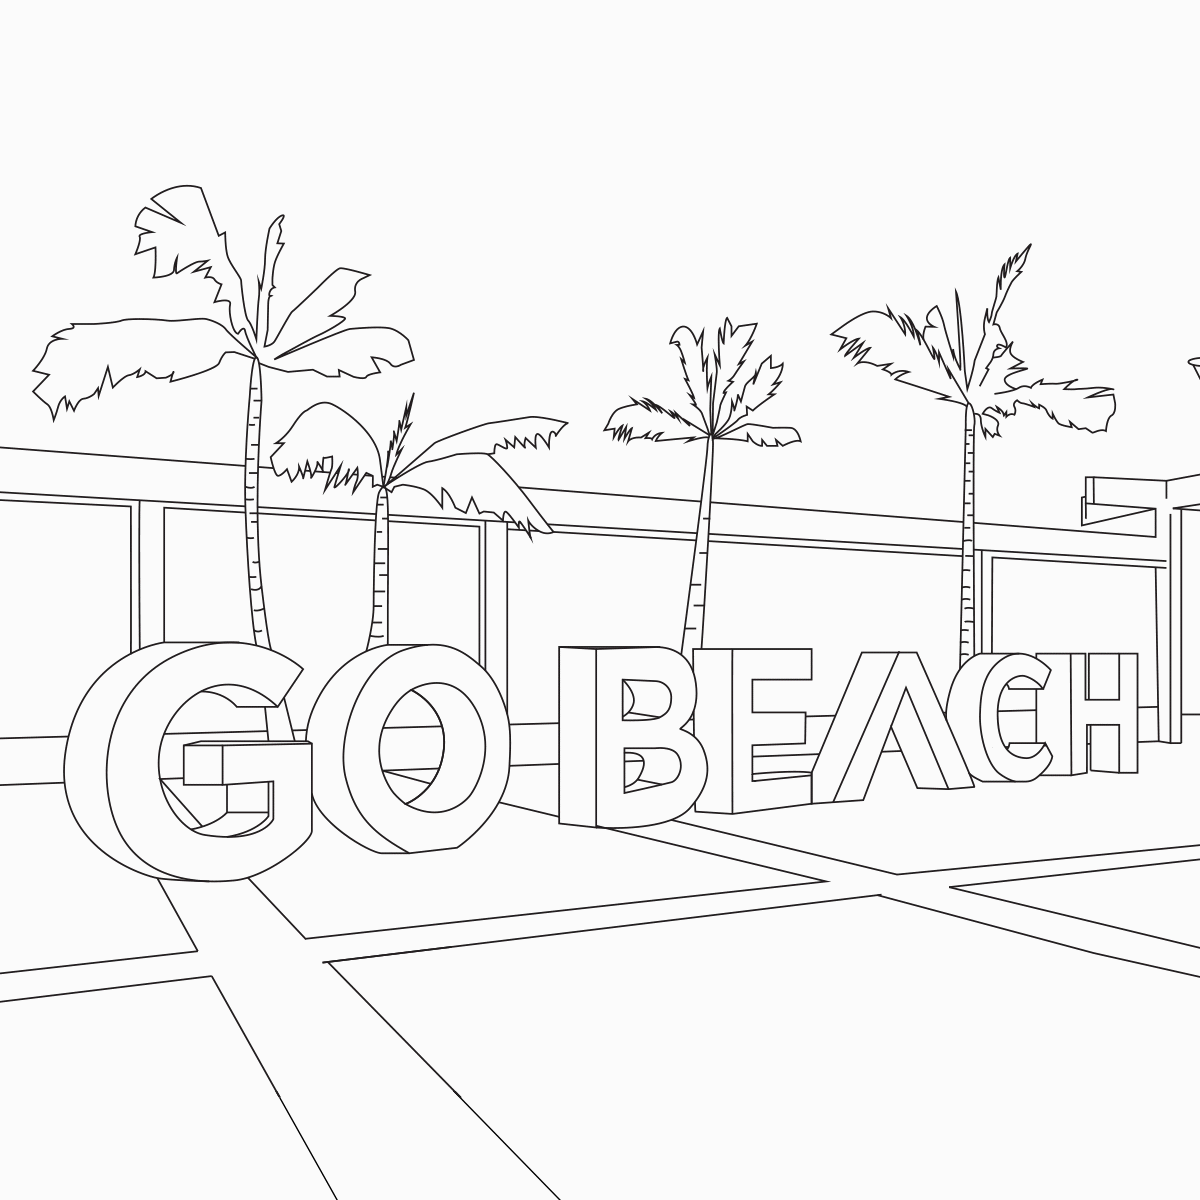 Coloring book animation